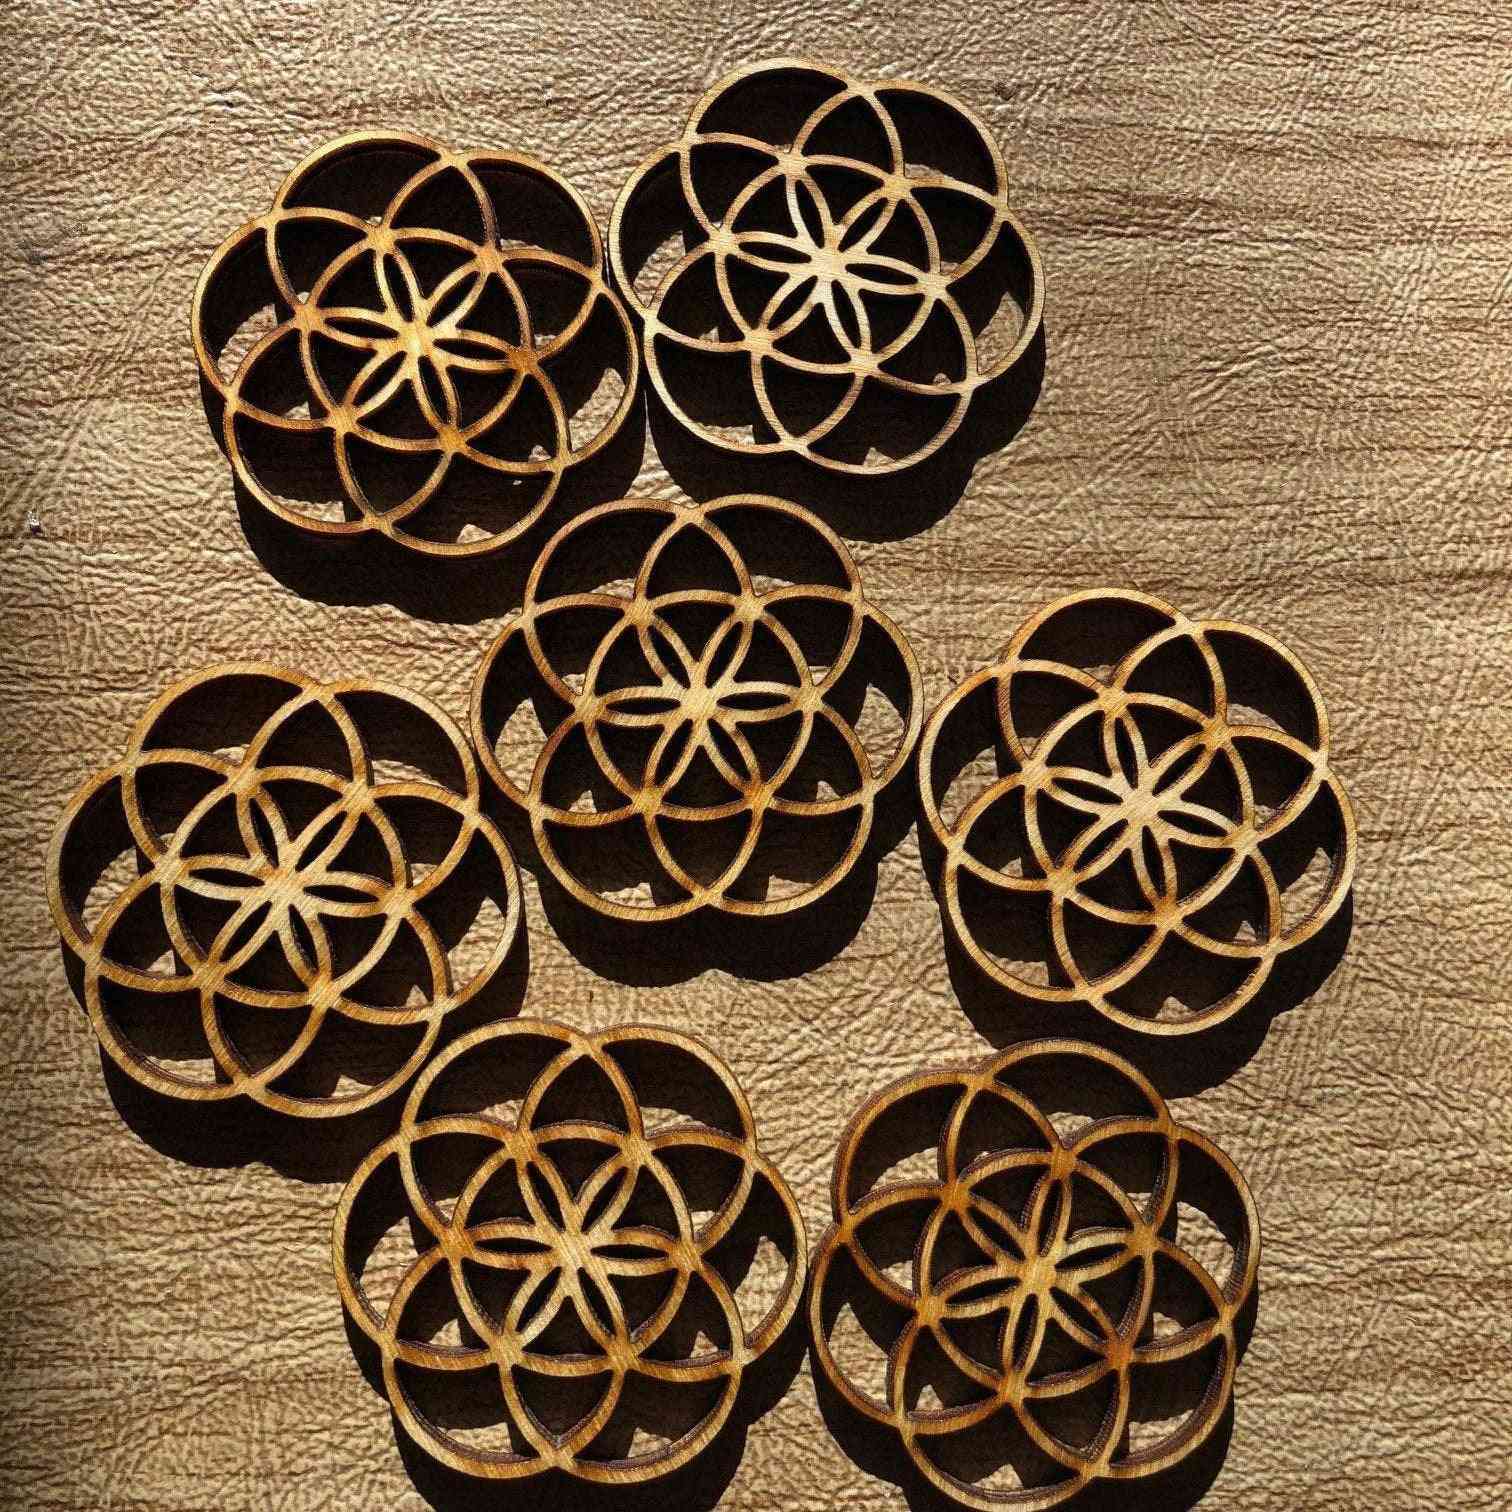 Flower Of Life - Wooden Beads To Make Earrings, Pendants, Art Pieces